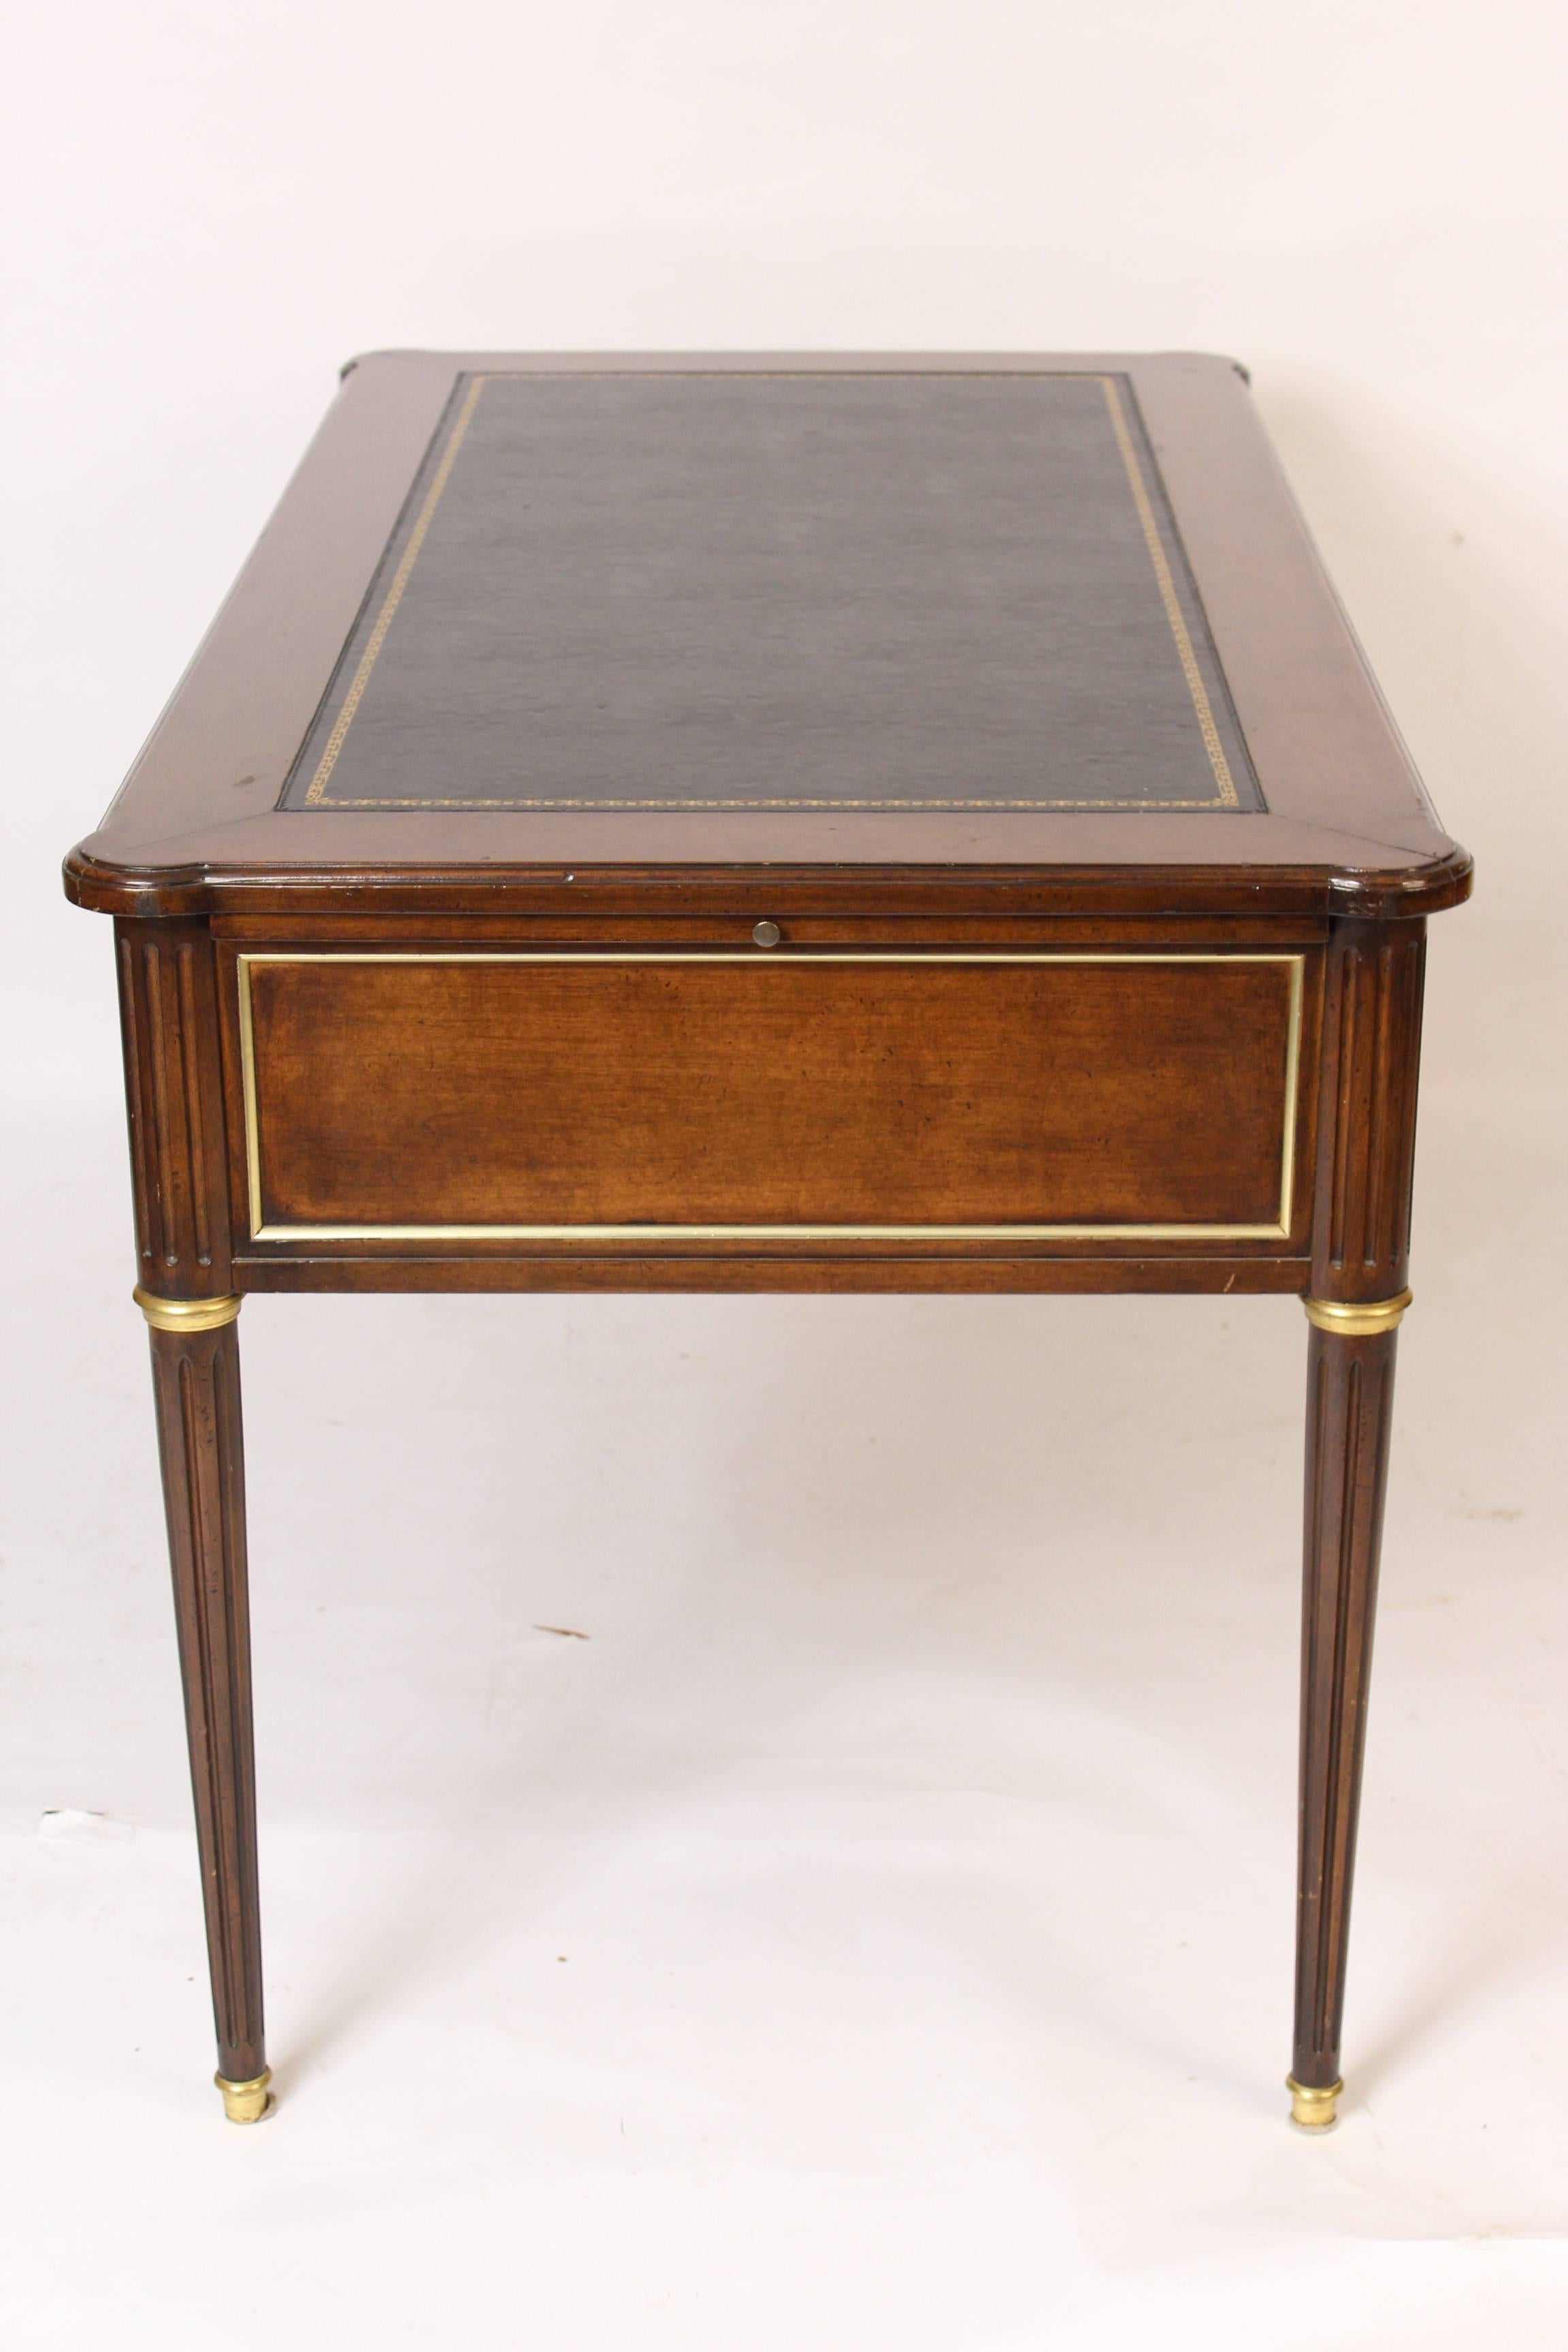 Louis XVI style brass-mounted mahogany desk with a tooled leather top made by Baker Furniture Company, circa 1990s.